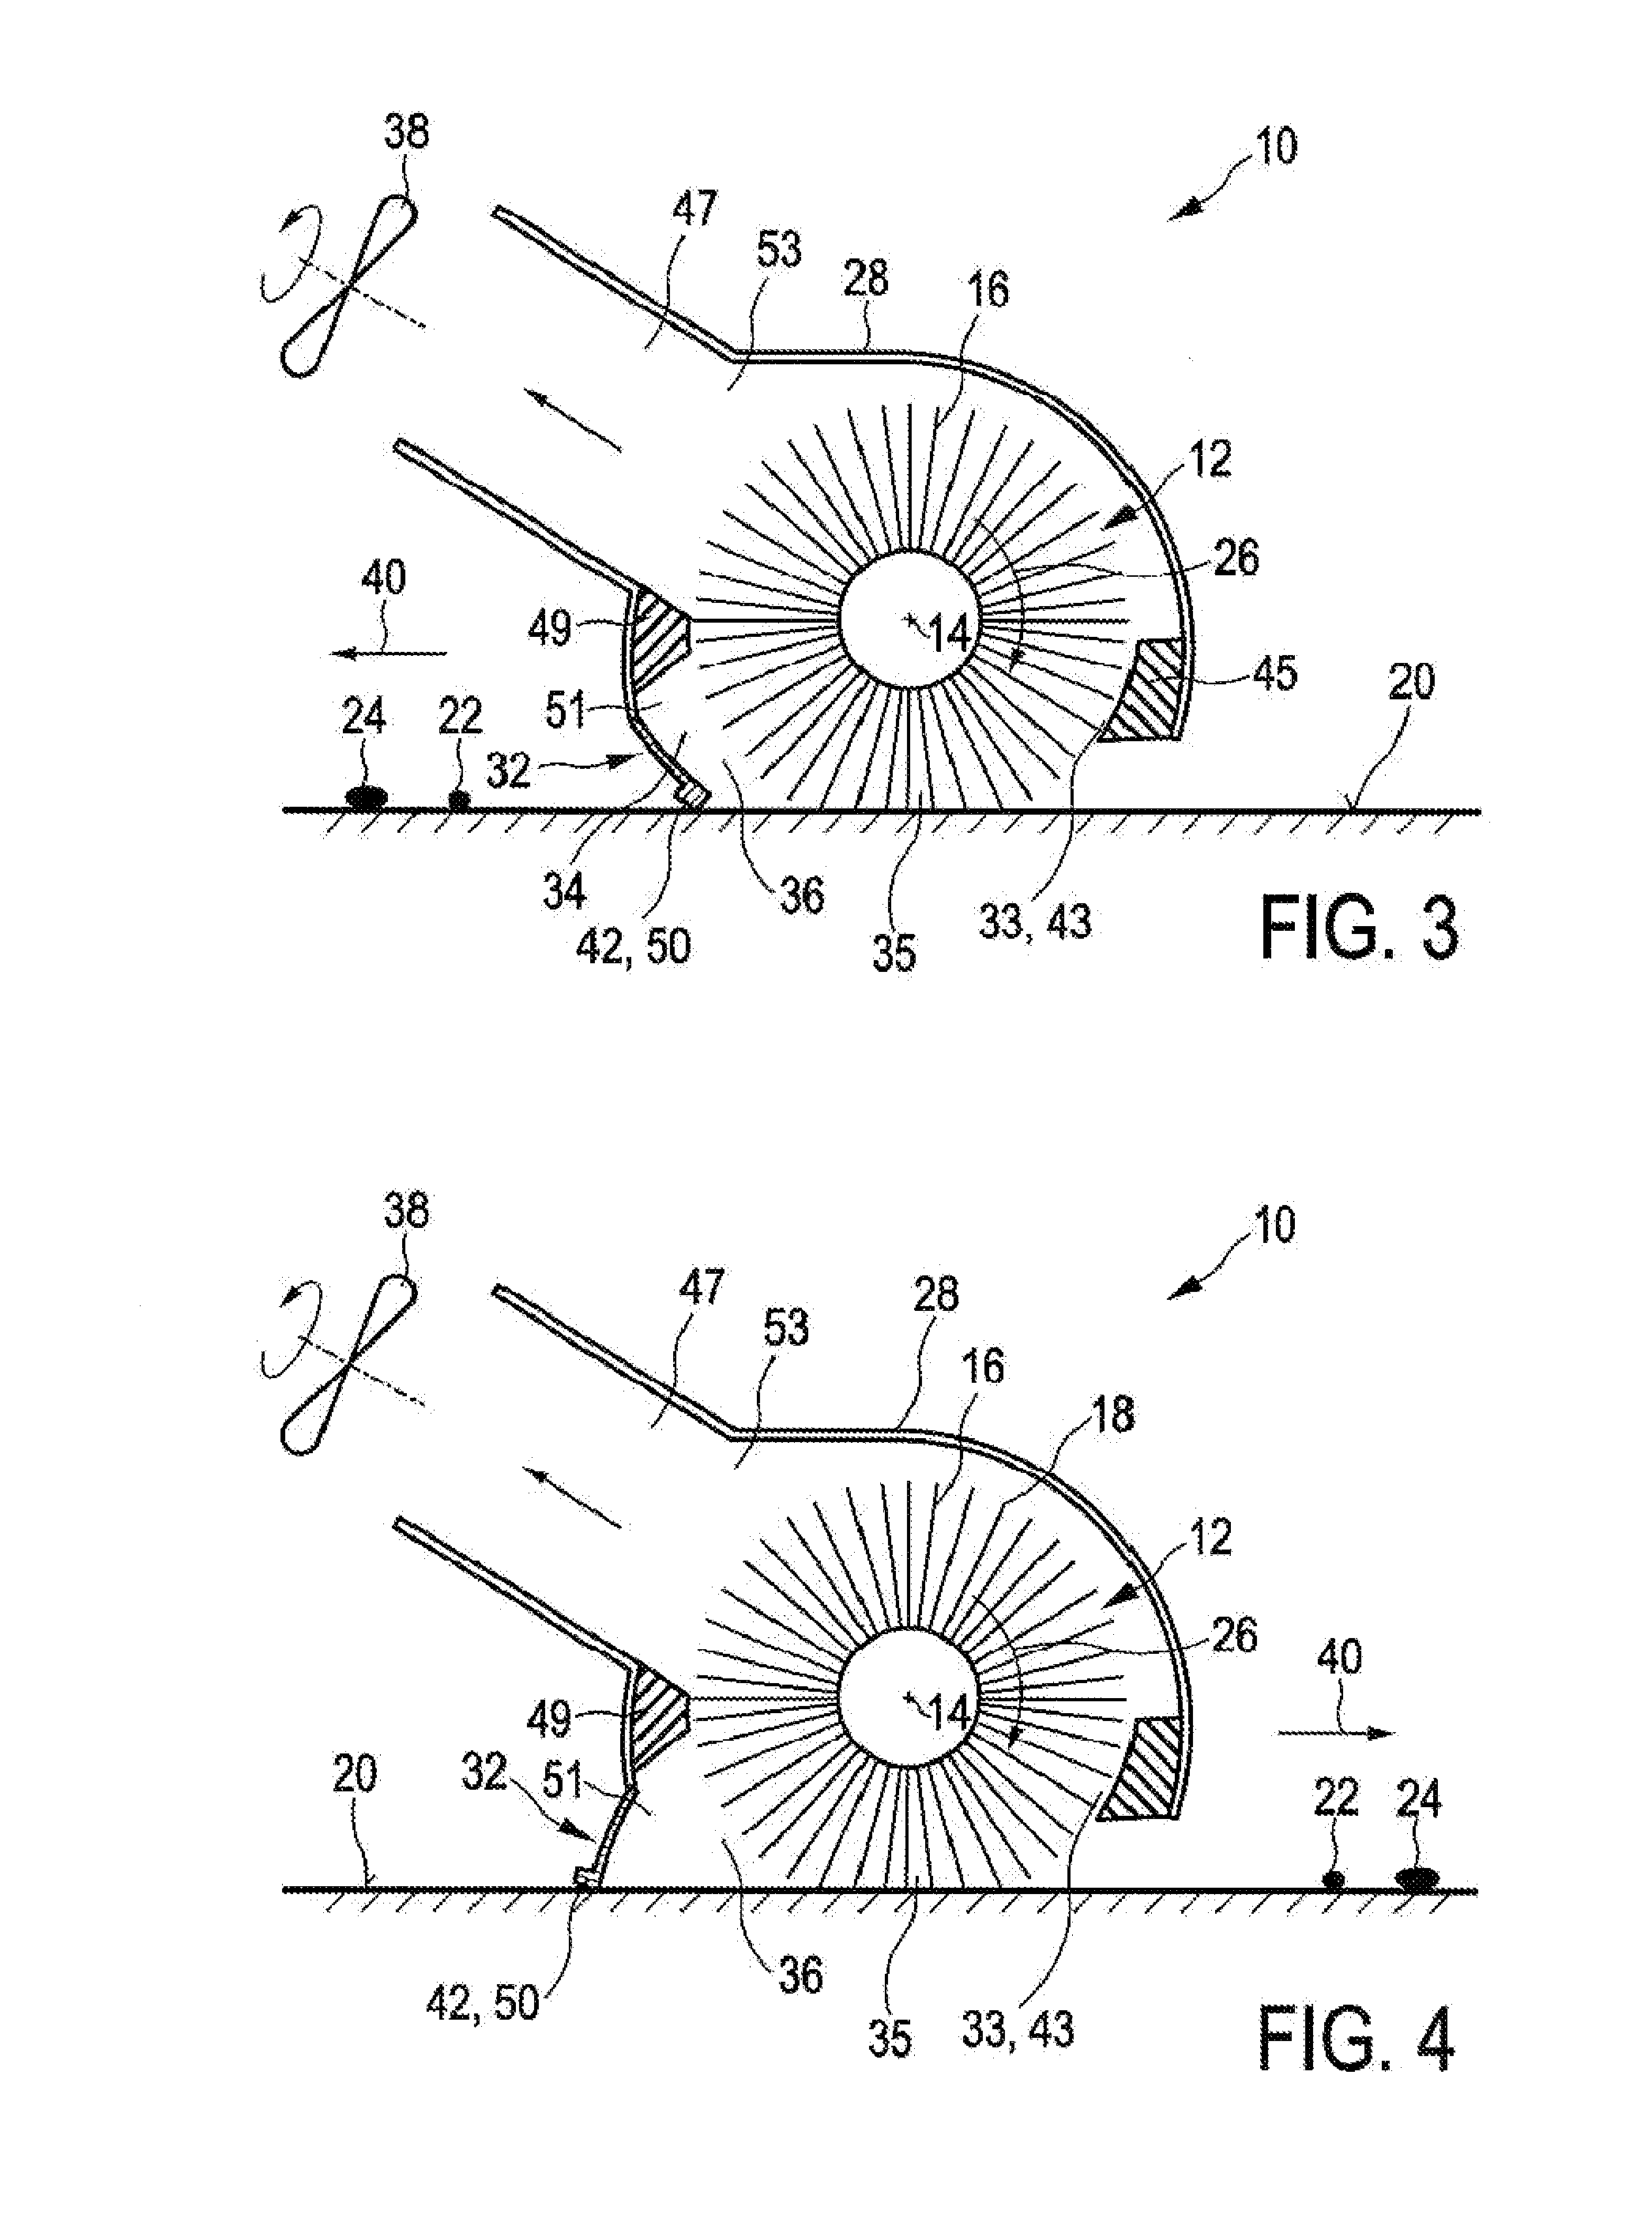 Cleaning device for cleaning a surface comprising a brush and a squeegee element